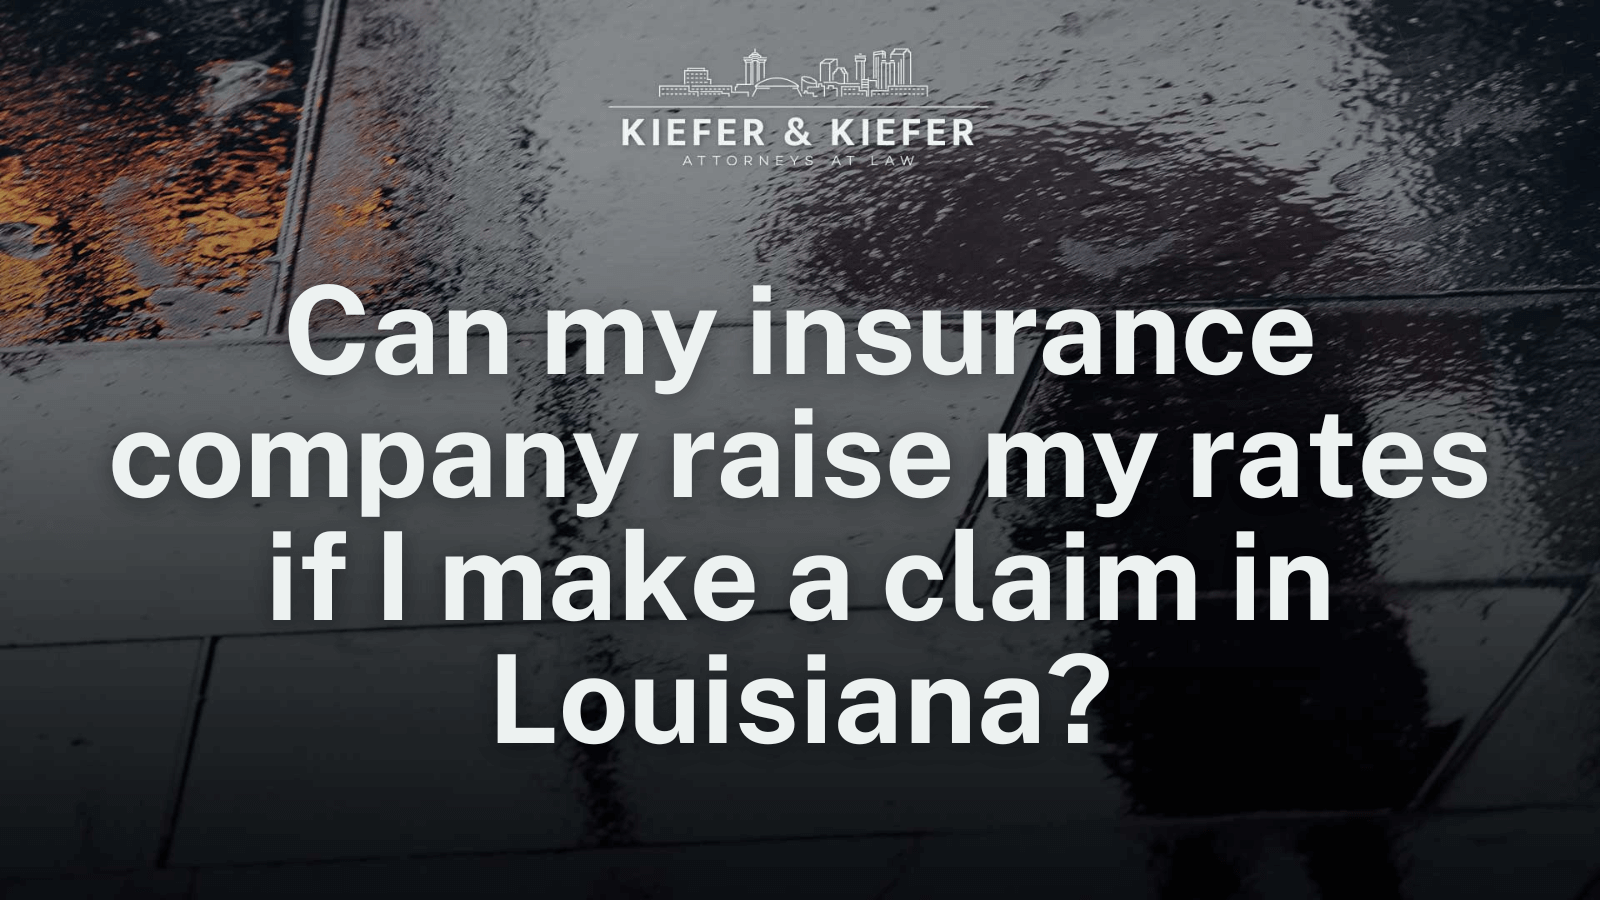 Can my insurance company raise my rates if I make a claim in Louisiana - Kiefer & Kiefer New Orleans Personal Injury Attorneys